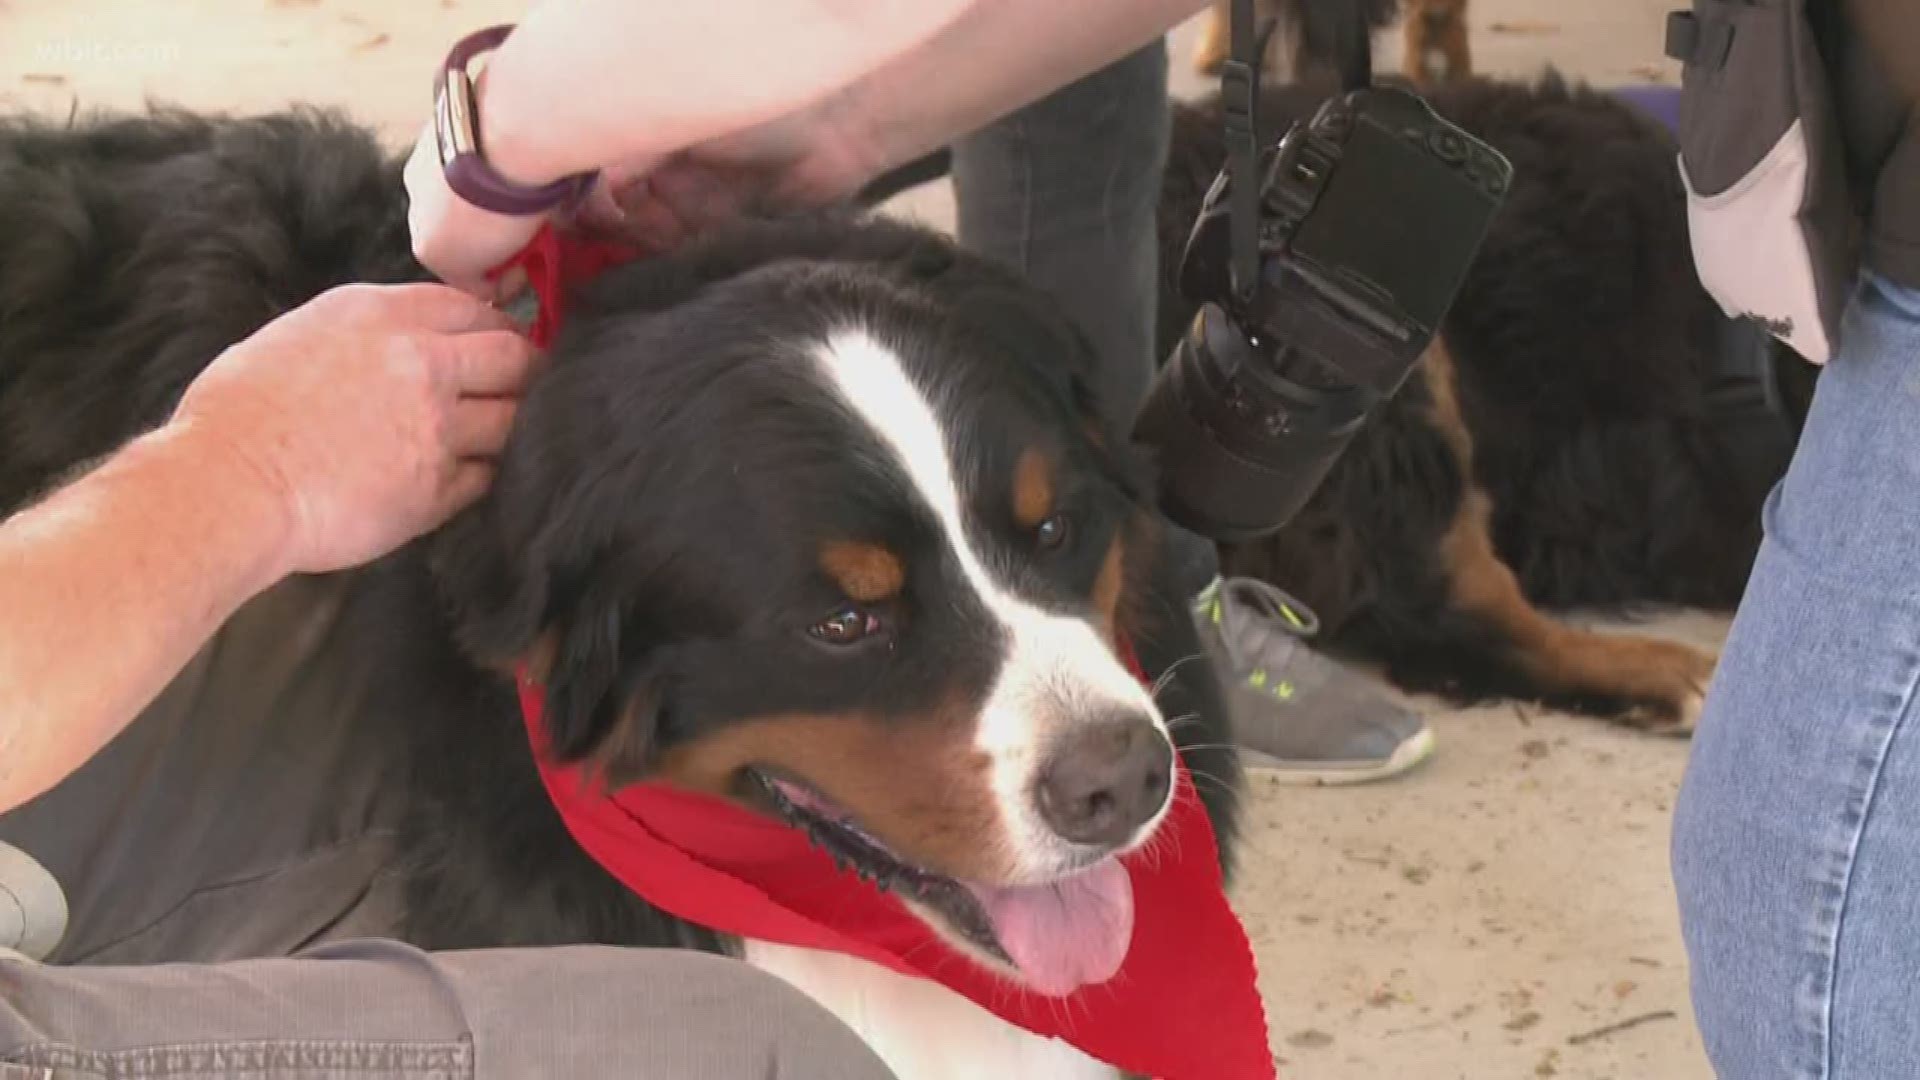 One dog breed was nearing extinction, but a few folks decided to come together to support the Bernese Mountain Dog breed and prevent its extinction.